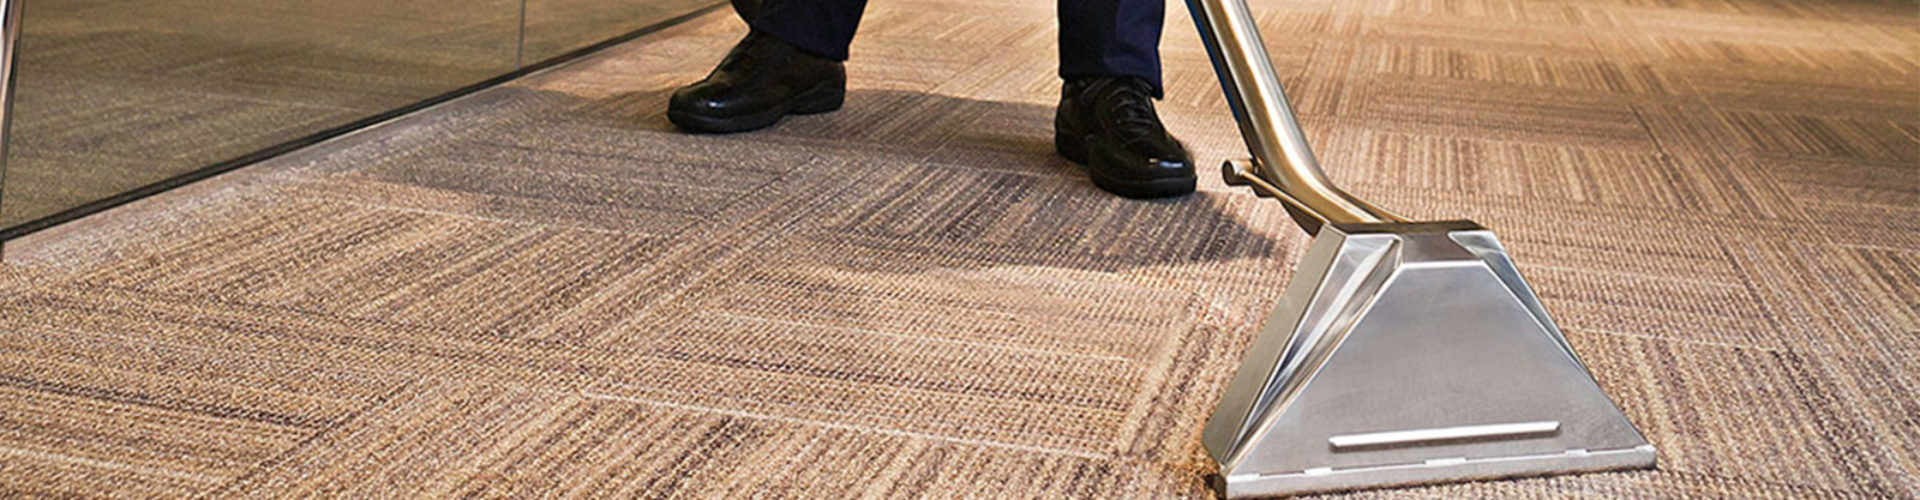 How a Dirty Carpet Affects Your Health!